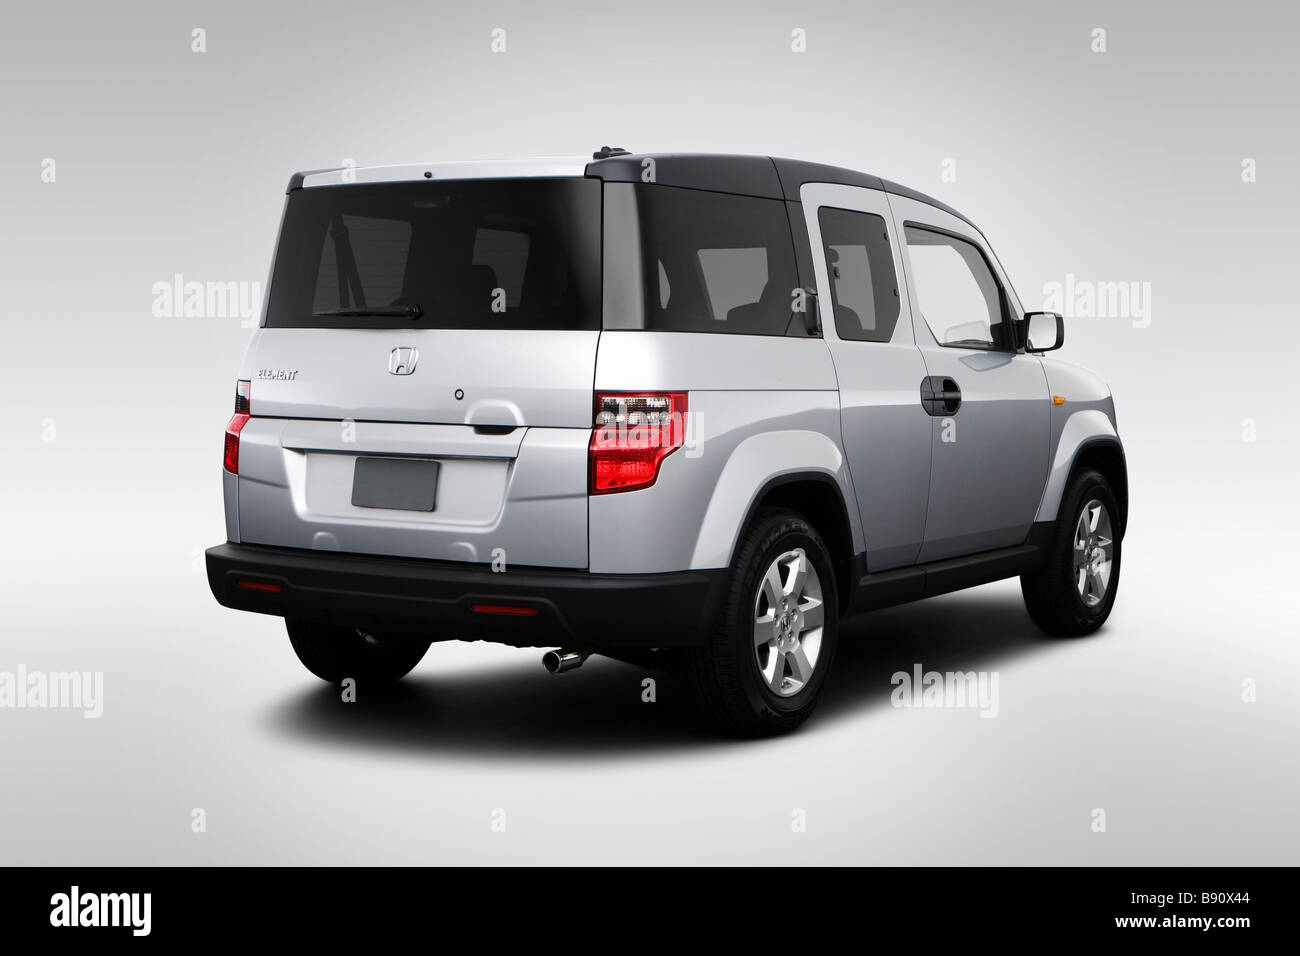 2009 Honda Element Ex In Silver Rear Angle View Stock Photo Alamy